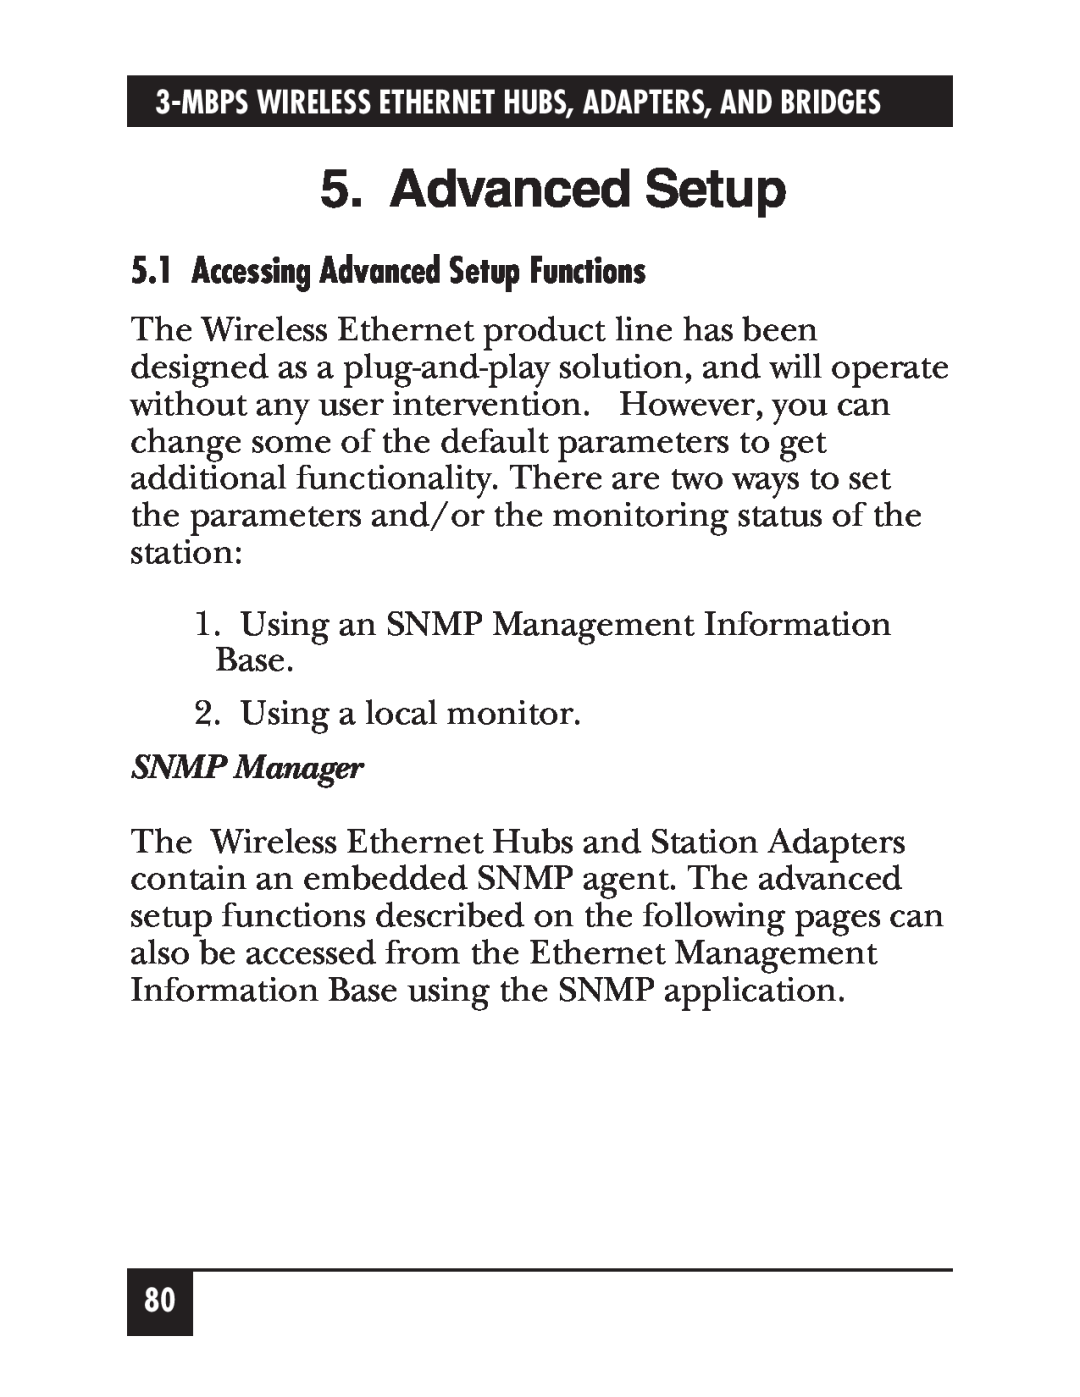 Black Box LW008A, LW012AE, LW011AE, LW005A, LW009A, LW003A, LW002A manual Accessing Advanced Setup Functions, SNMP Manager 